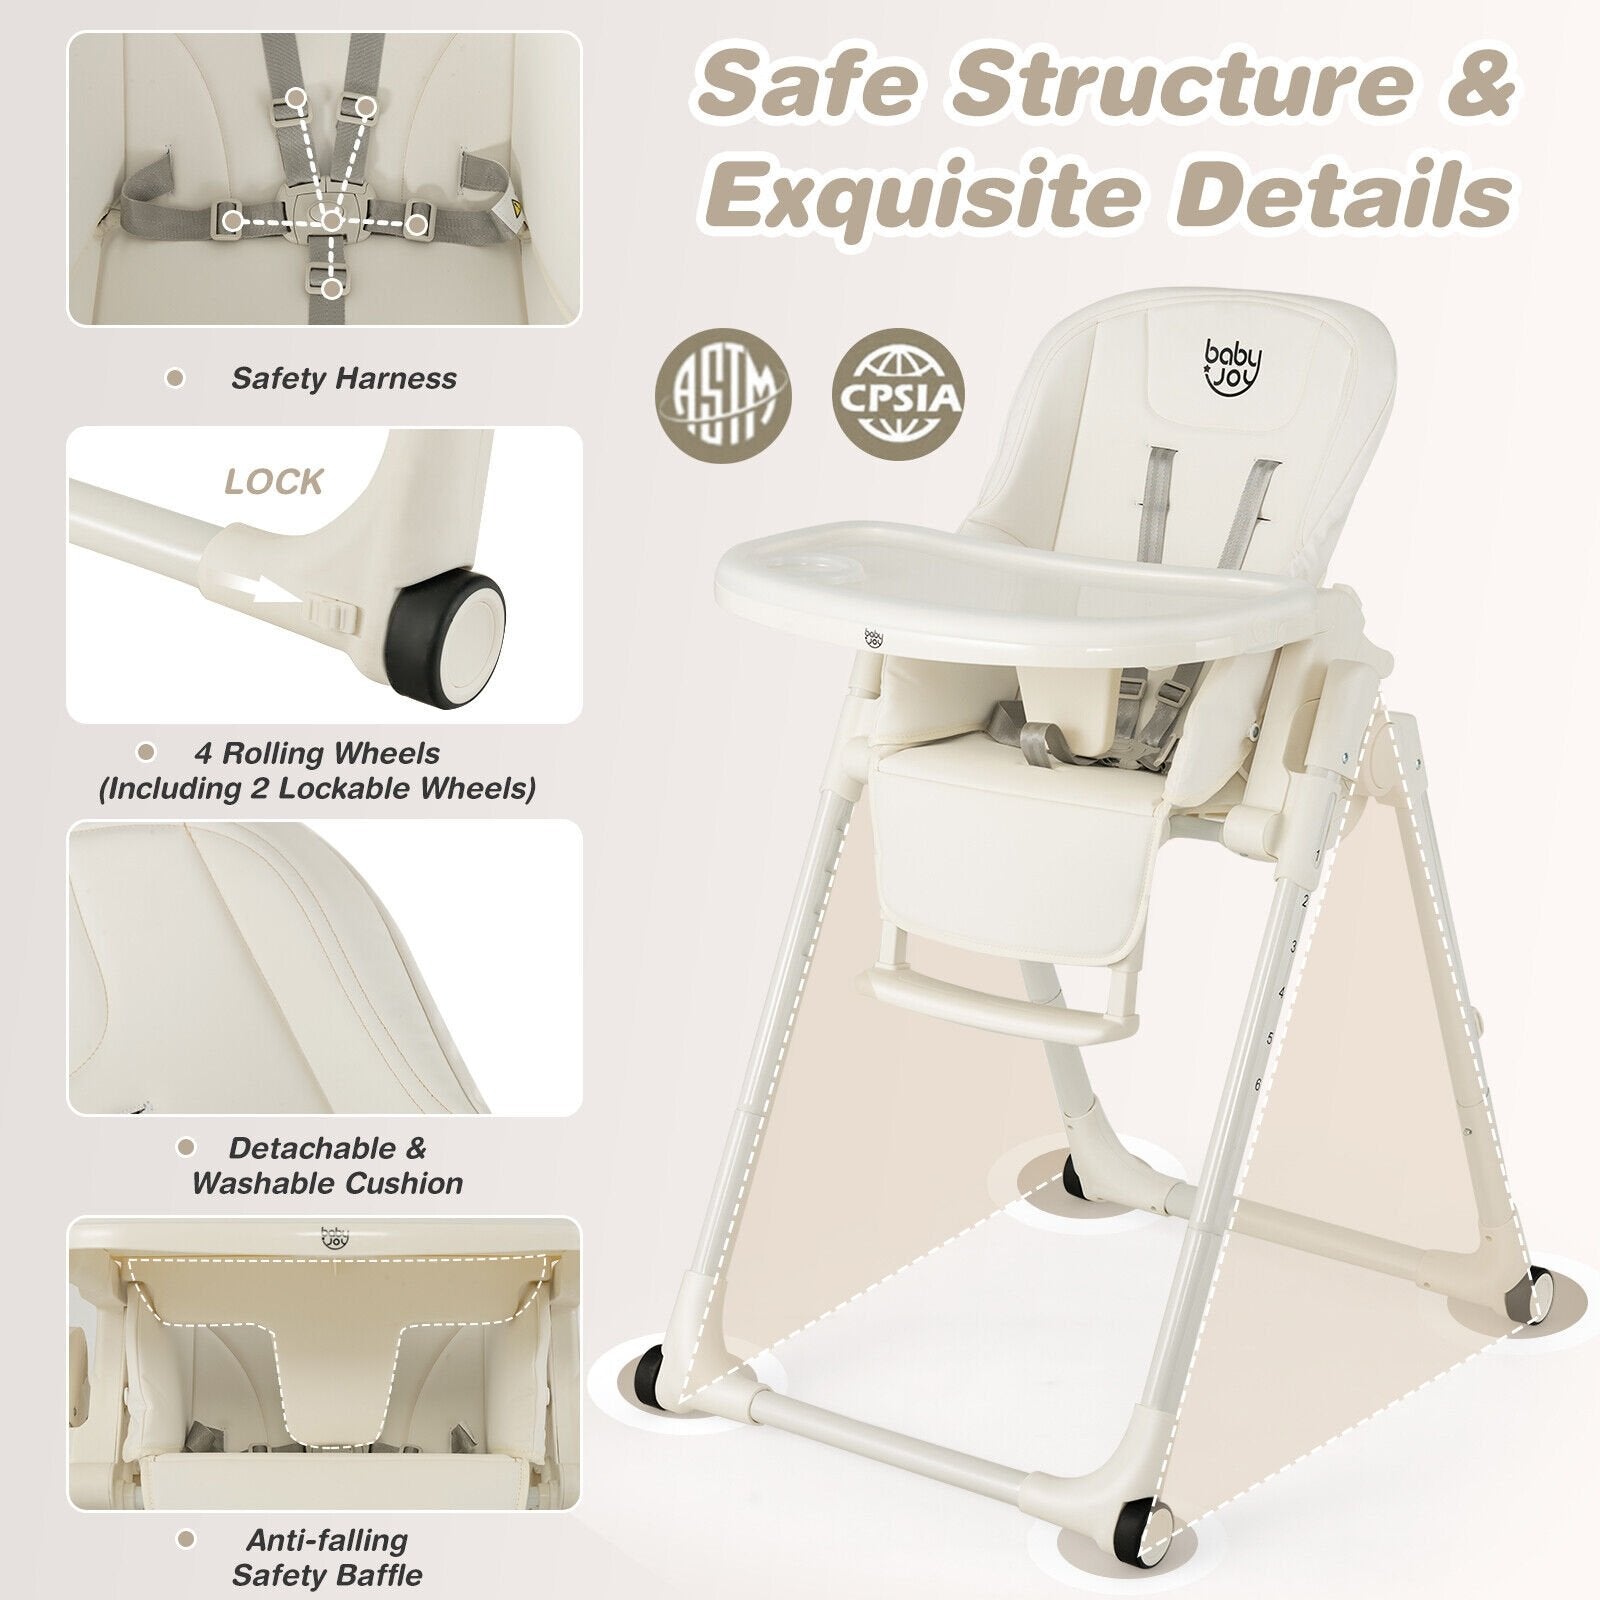 4-in-1 Baby High Chair with 6 Adjustable Heights, Beige at Gallery Canada